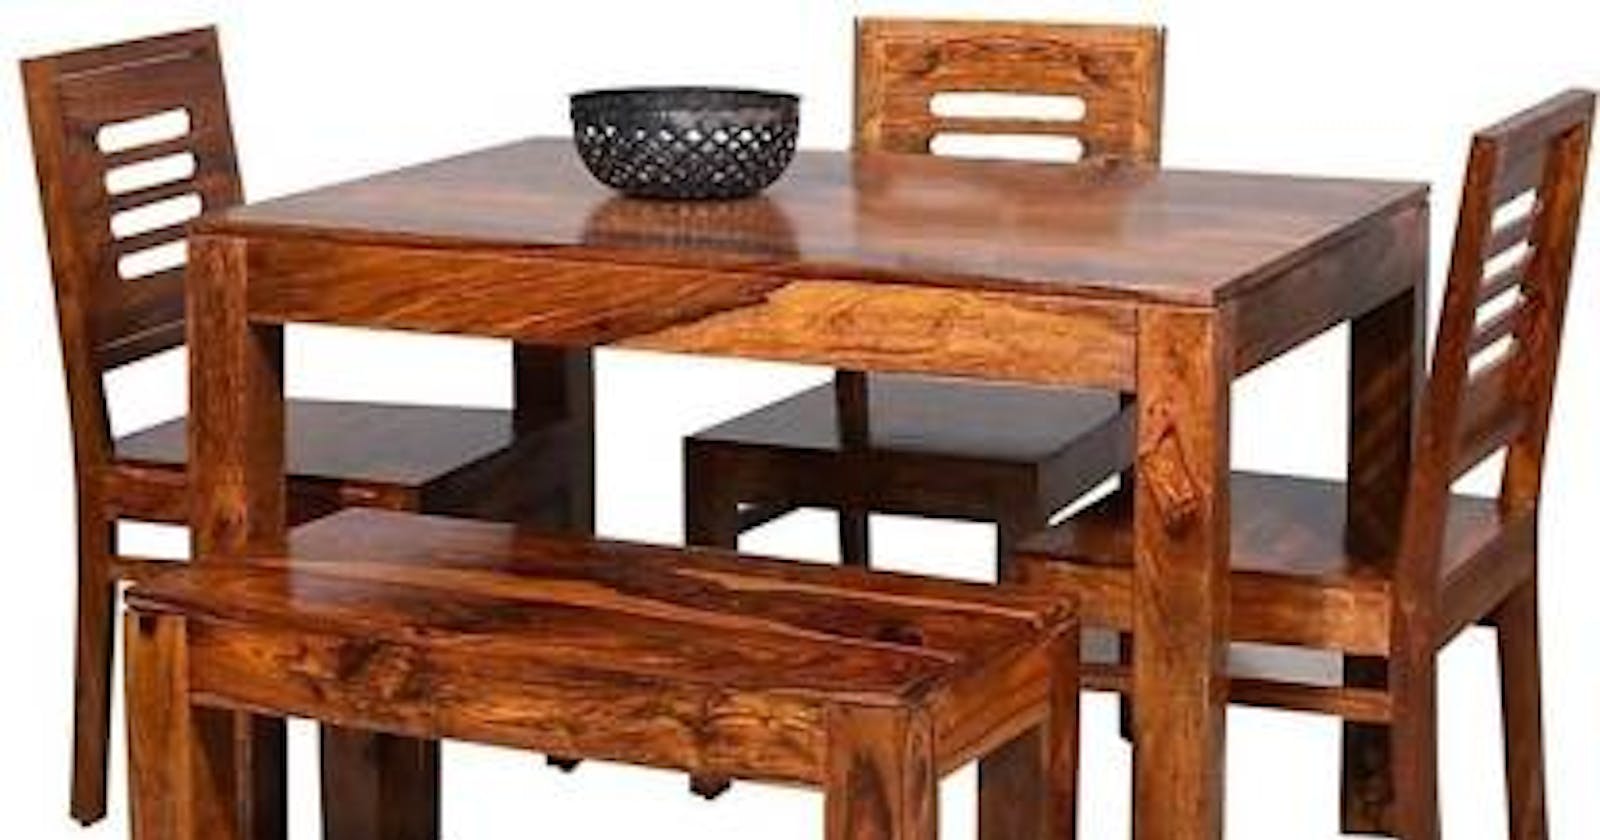 Furniture Market Report 2021-26: Analysis, Scope, Share, Demand, Size, Growth